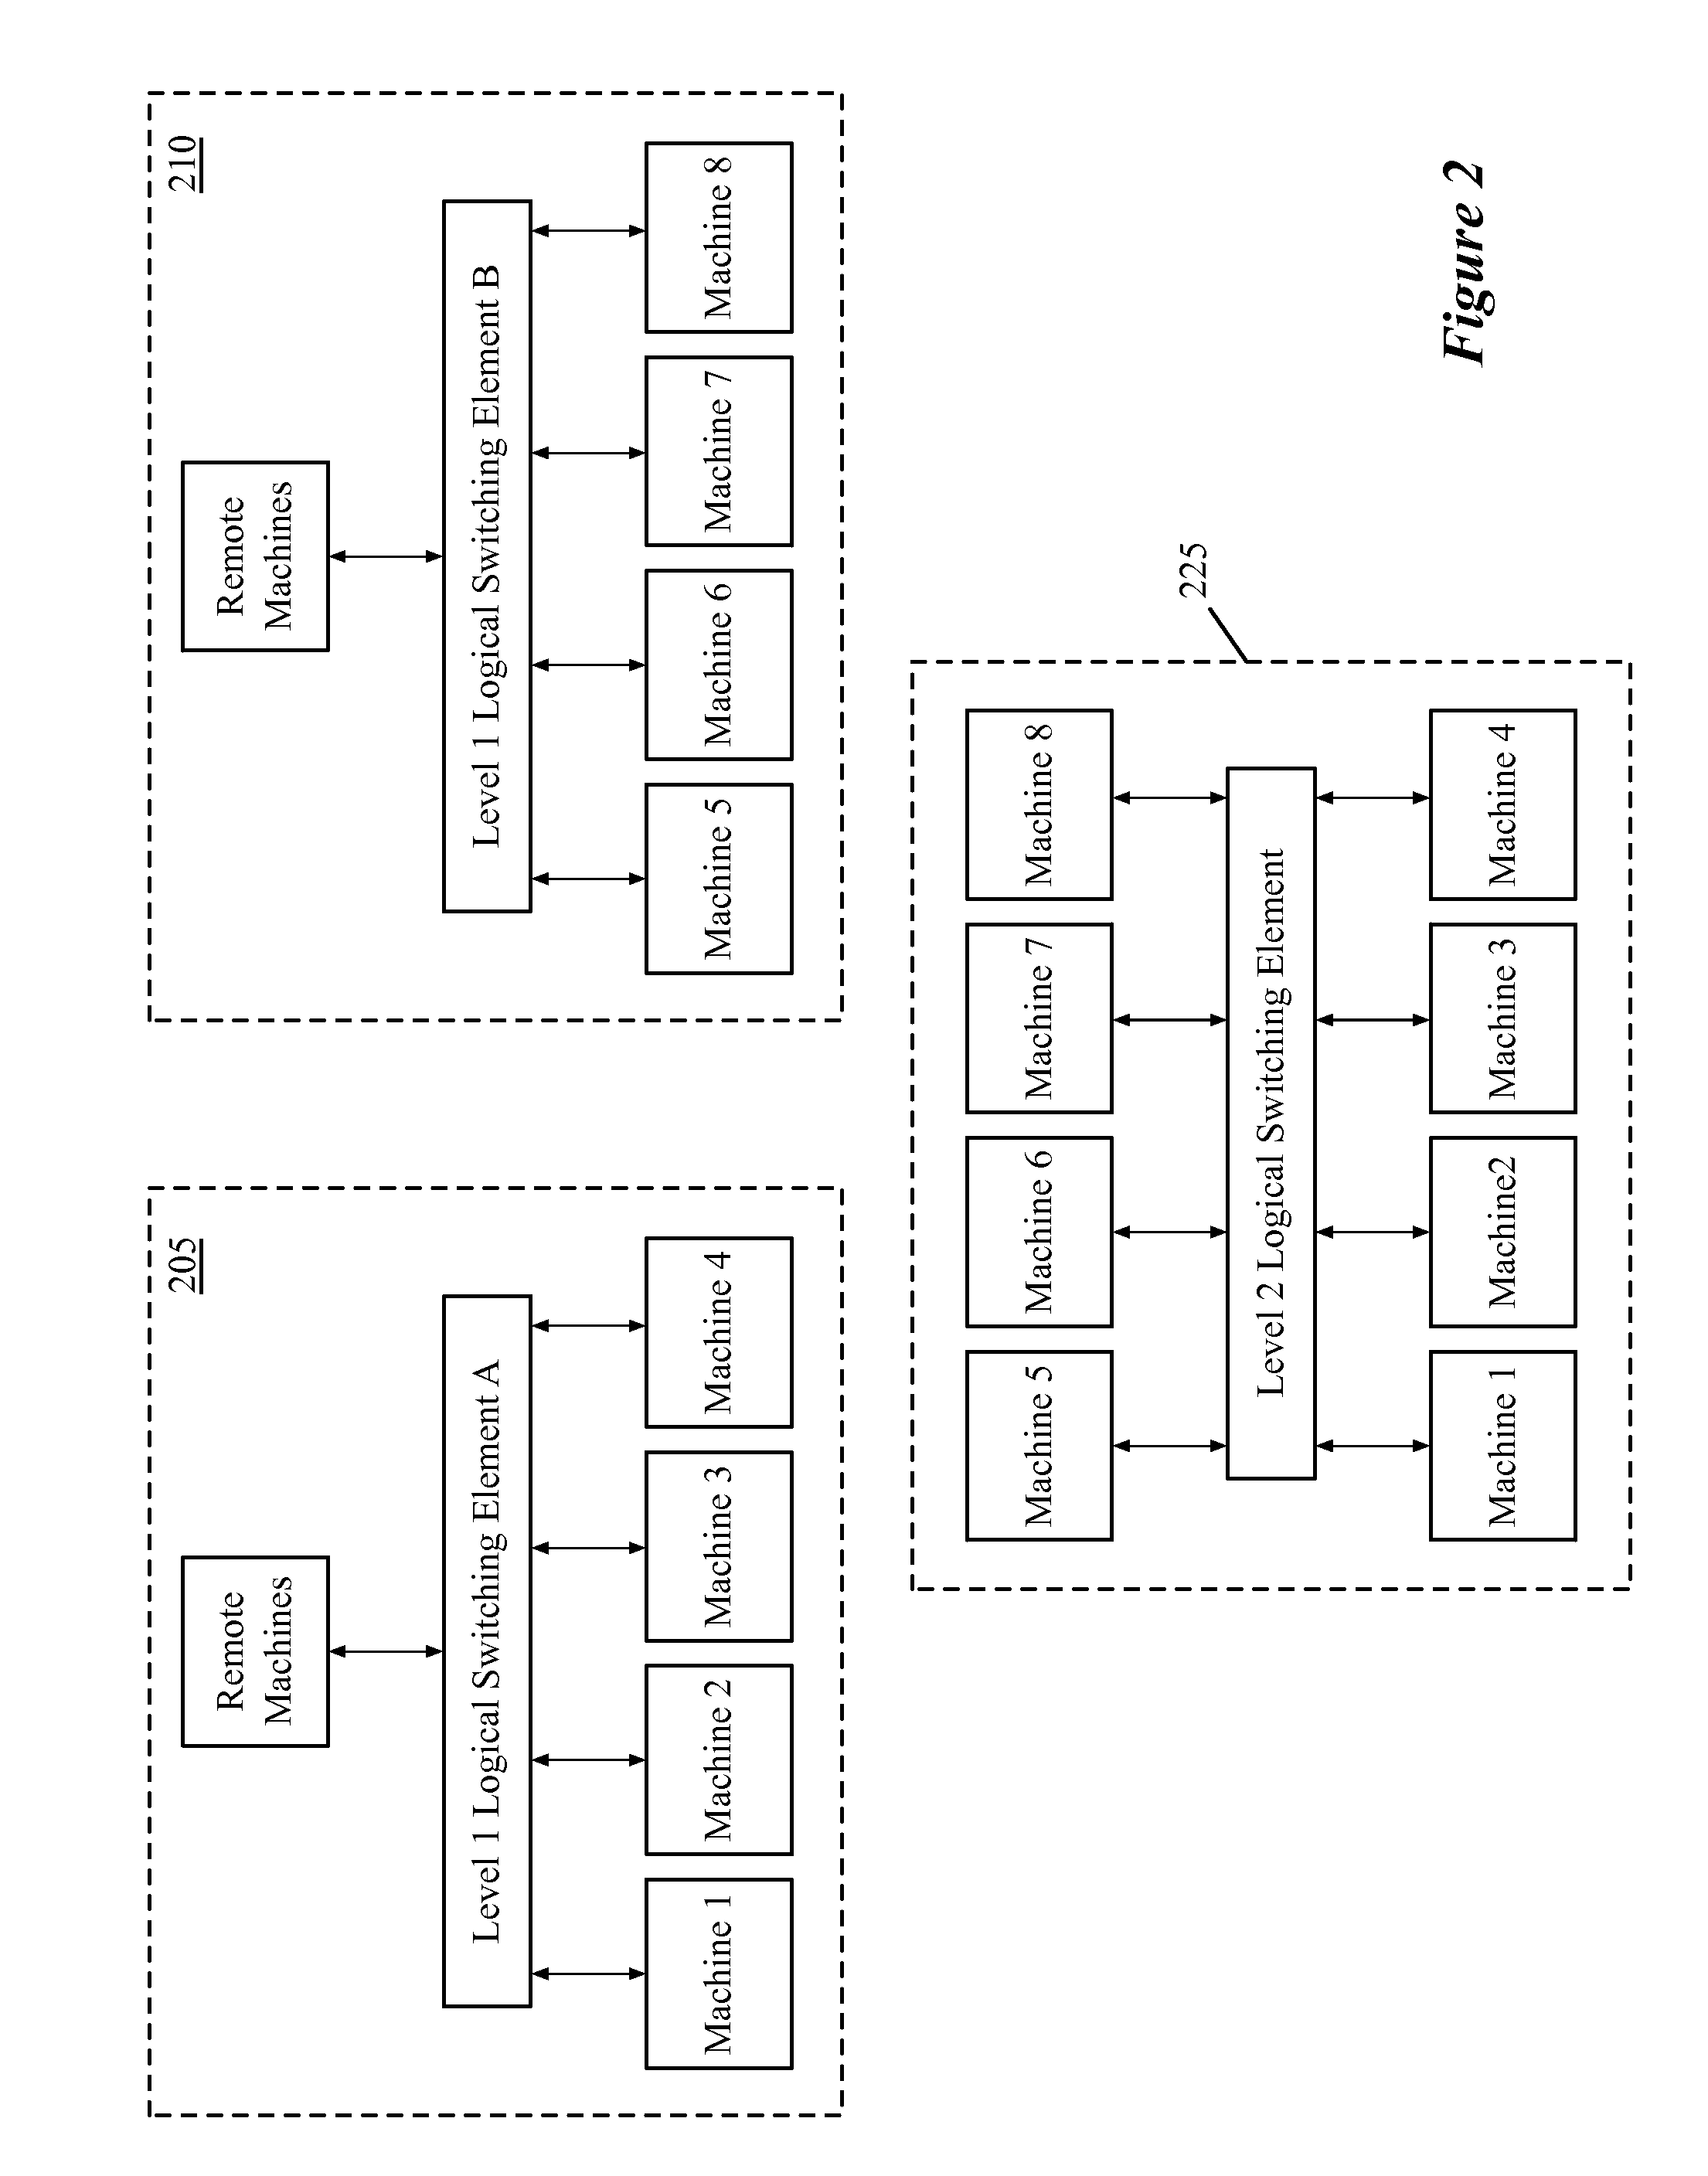 Federating interconnection switching element network to two or more levels